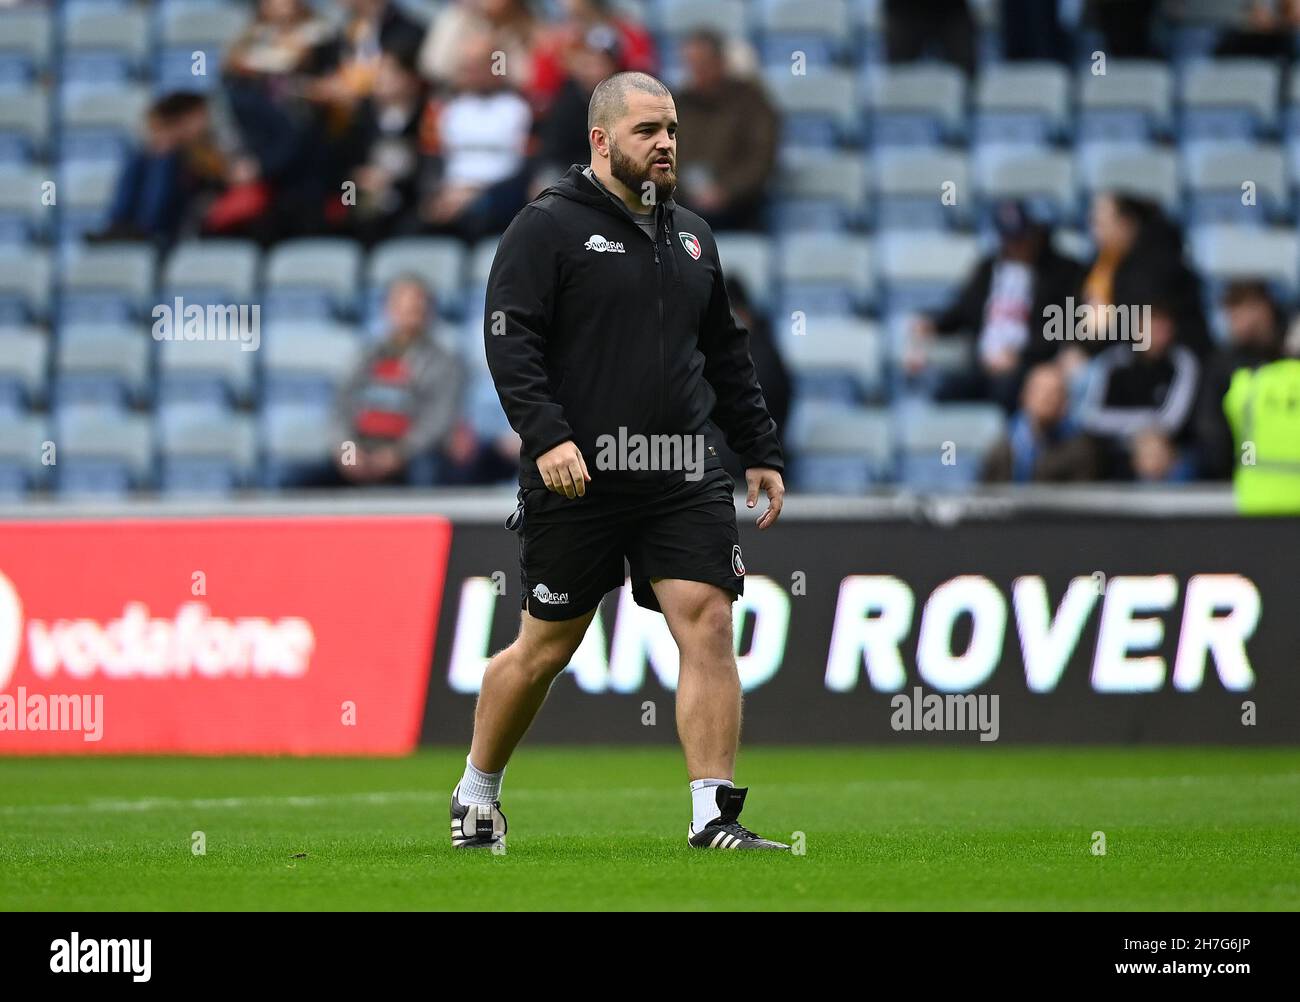 Coventry. United Kingdom. 20 November 2021. Premiership Rugby Cup. Wasps V Leicester Tigers. Coventry Building Society arena. Coventry. Tom Harrison (Leicester Tigers scrum coach) during the Premiership Rugby cup game between Wasps and Leicester Tigers. Stock Photo